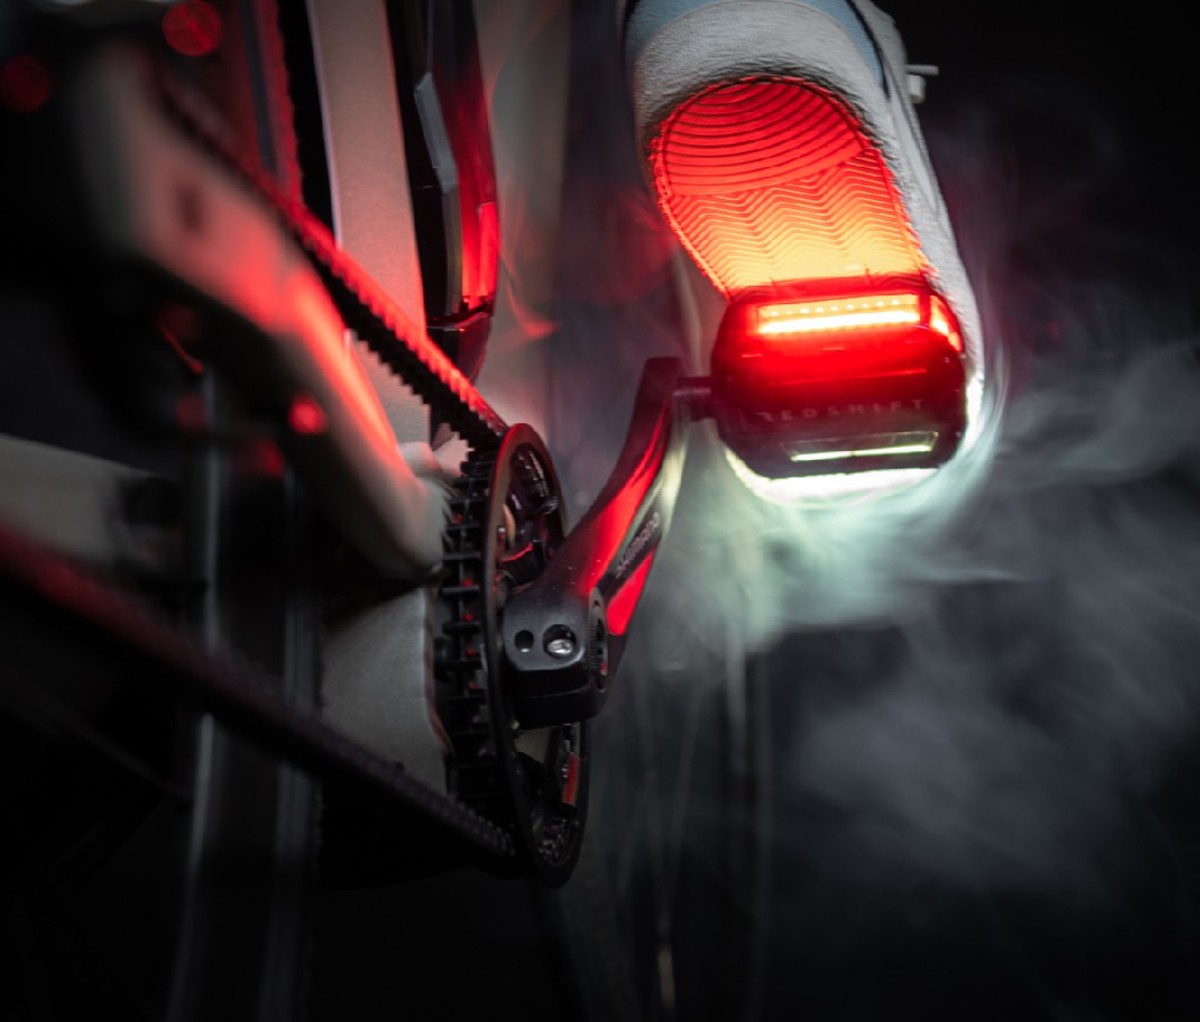 Cyclist riding bike at night with red and white light on pedals